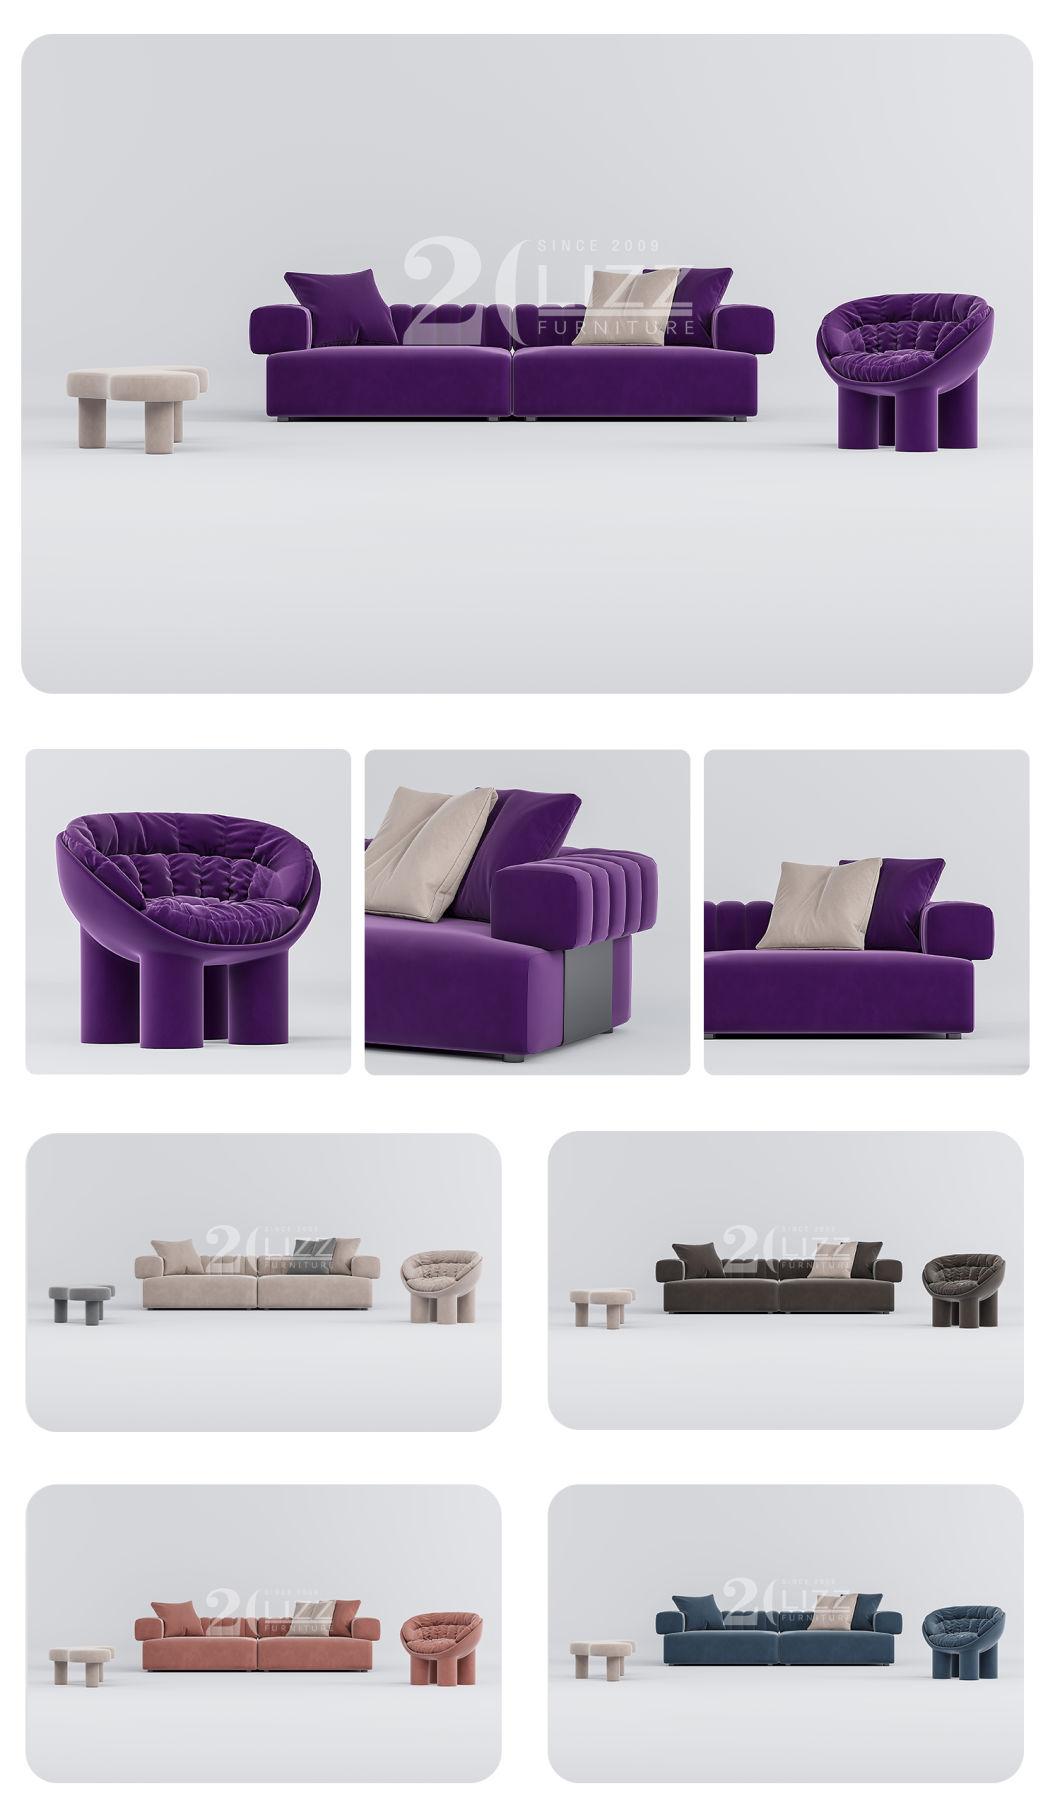 Professional Commercial Office Home Furniture Luxury Modern Fabric Couch Living Room Sofa Set